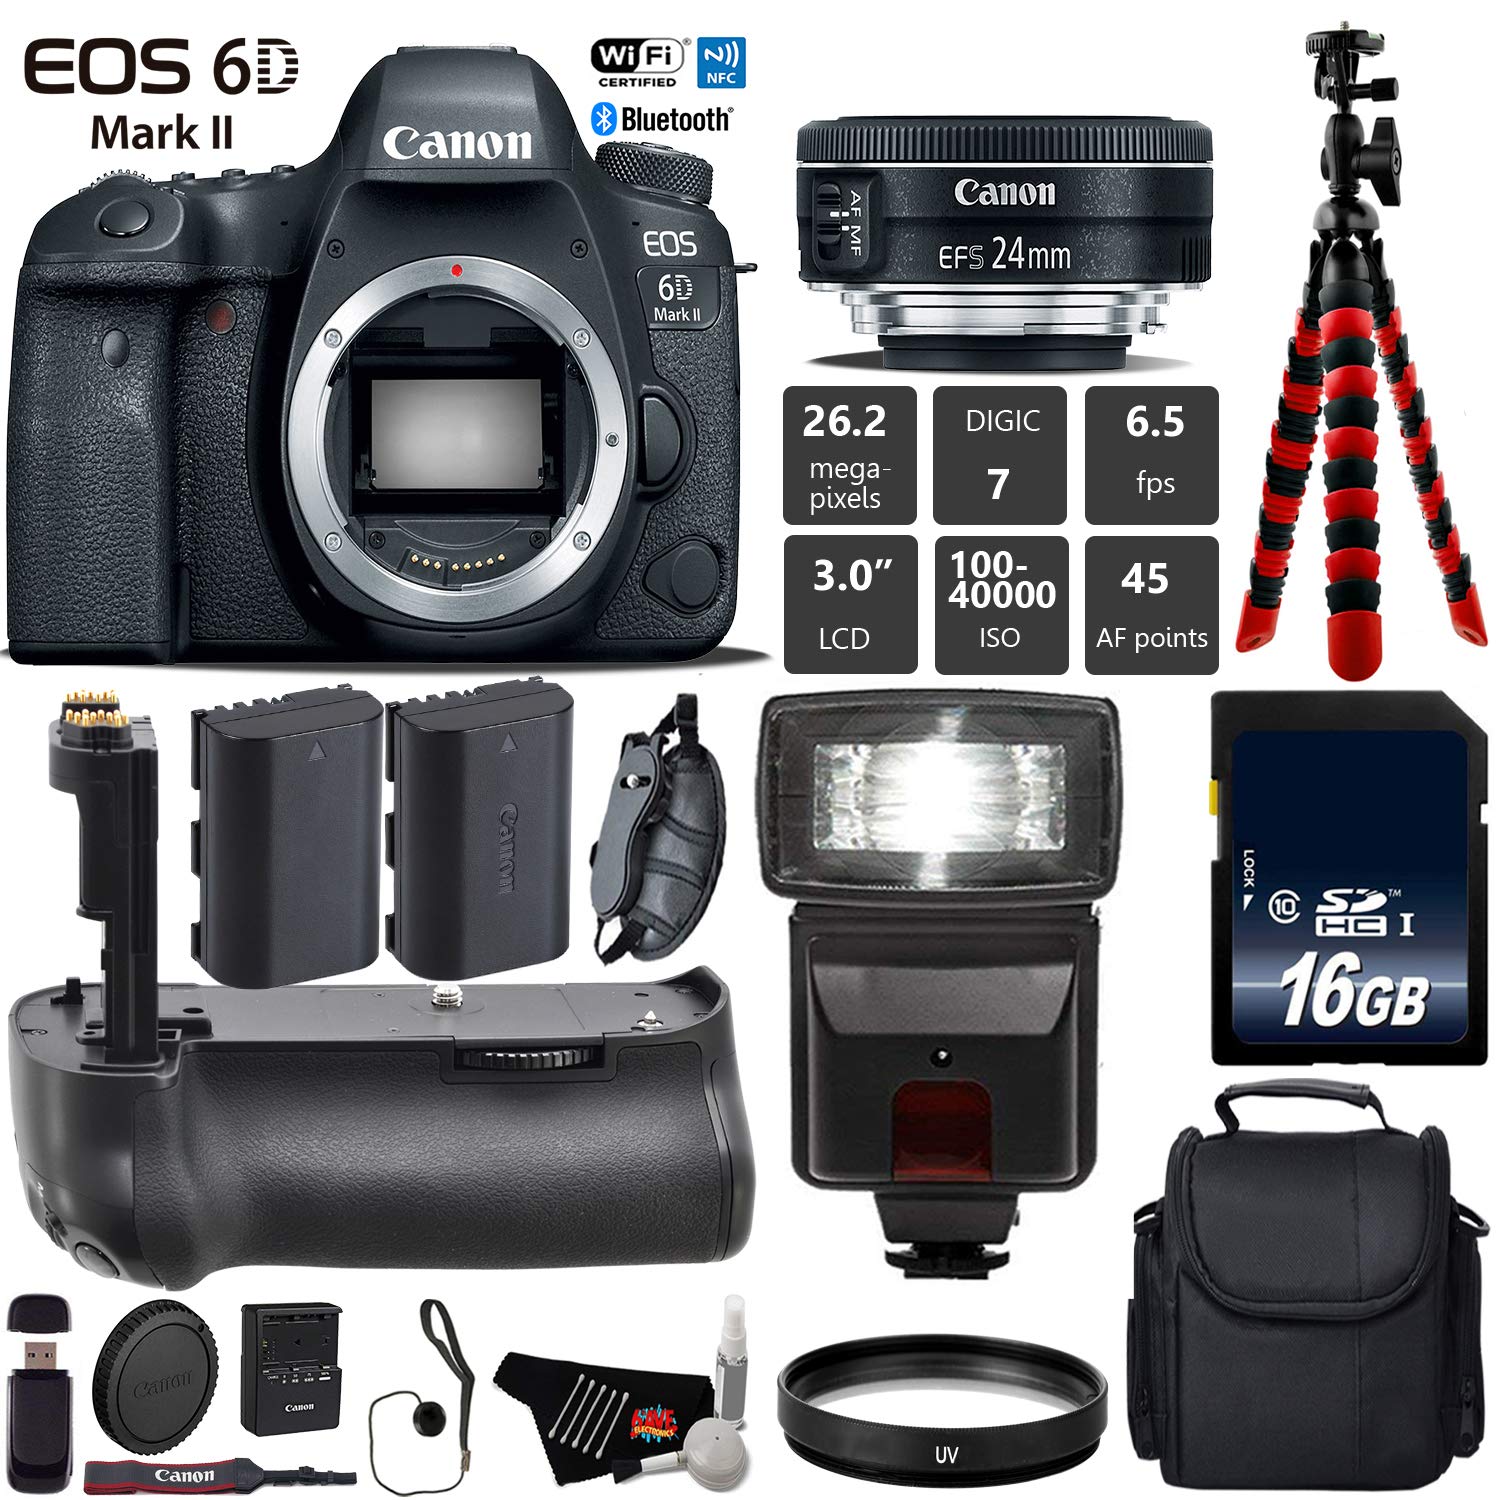 Canon EOS 6D Mark II DSLR Camera With 24mm f/2.8 STM Lens + Professional Battery Grip + UV Protection Filter + Flash Base Bundle